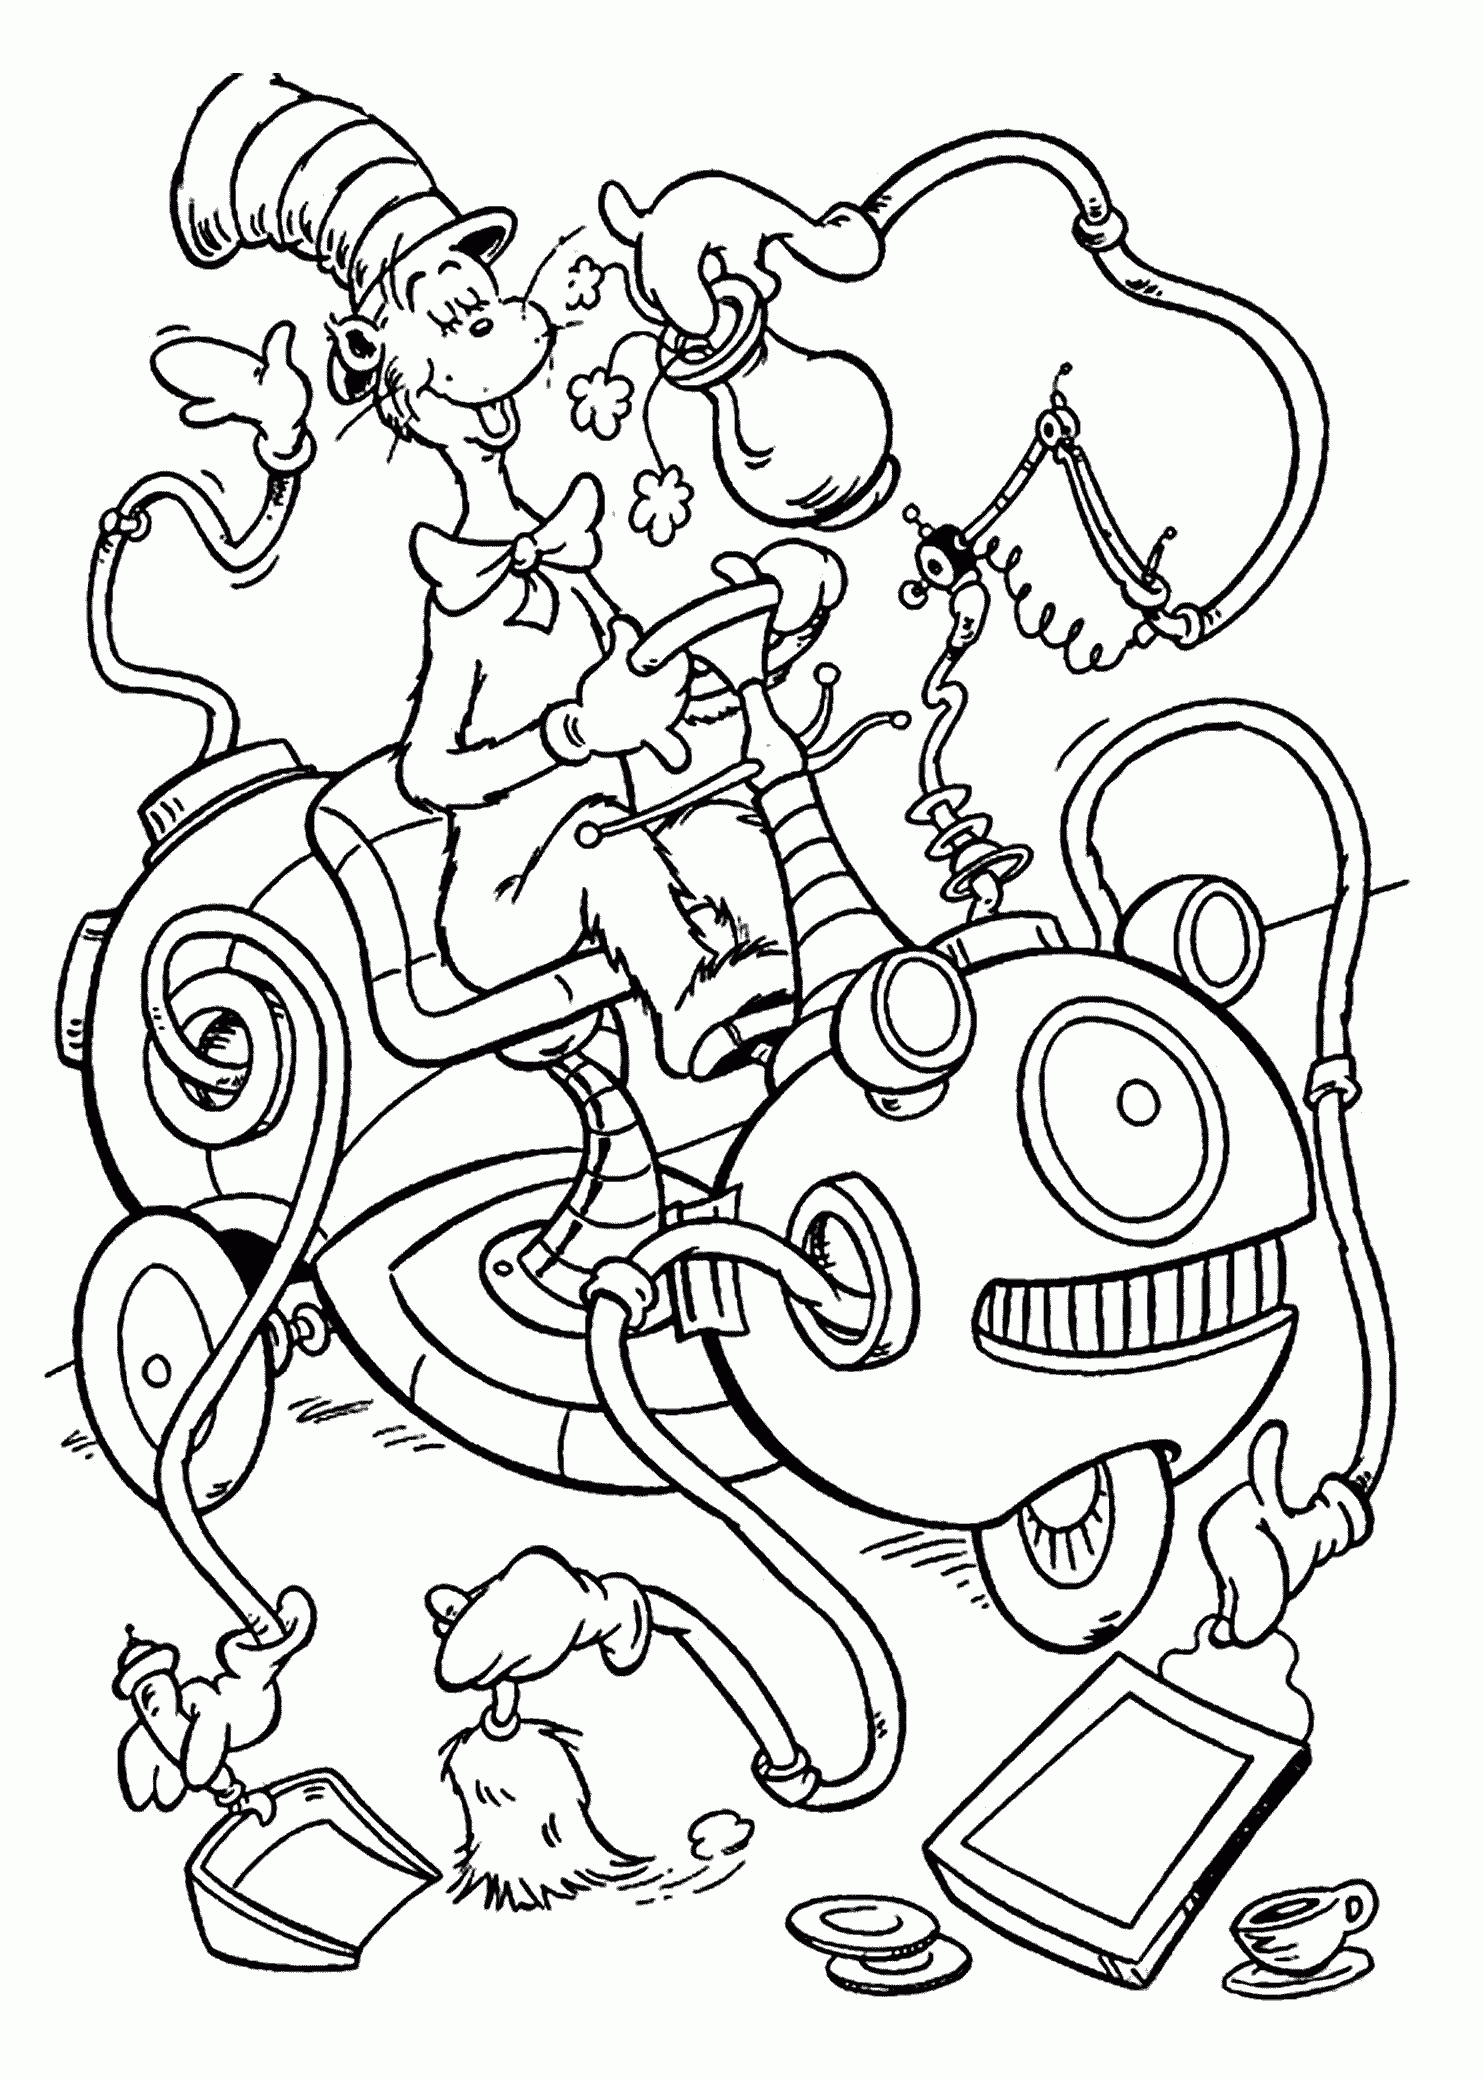 Free Doctor Who Coloring Pages - Coloring Home - Doctor Coloring Pages Free Printable